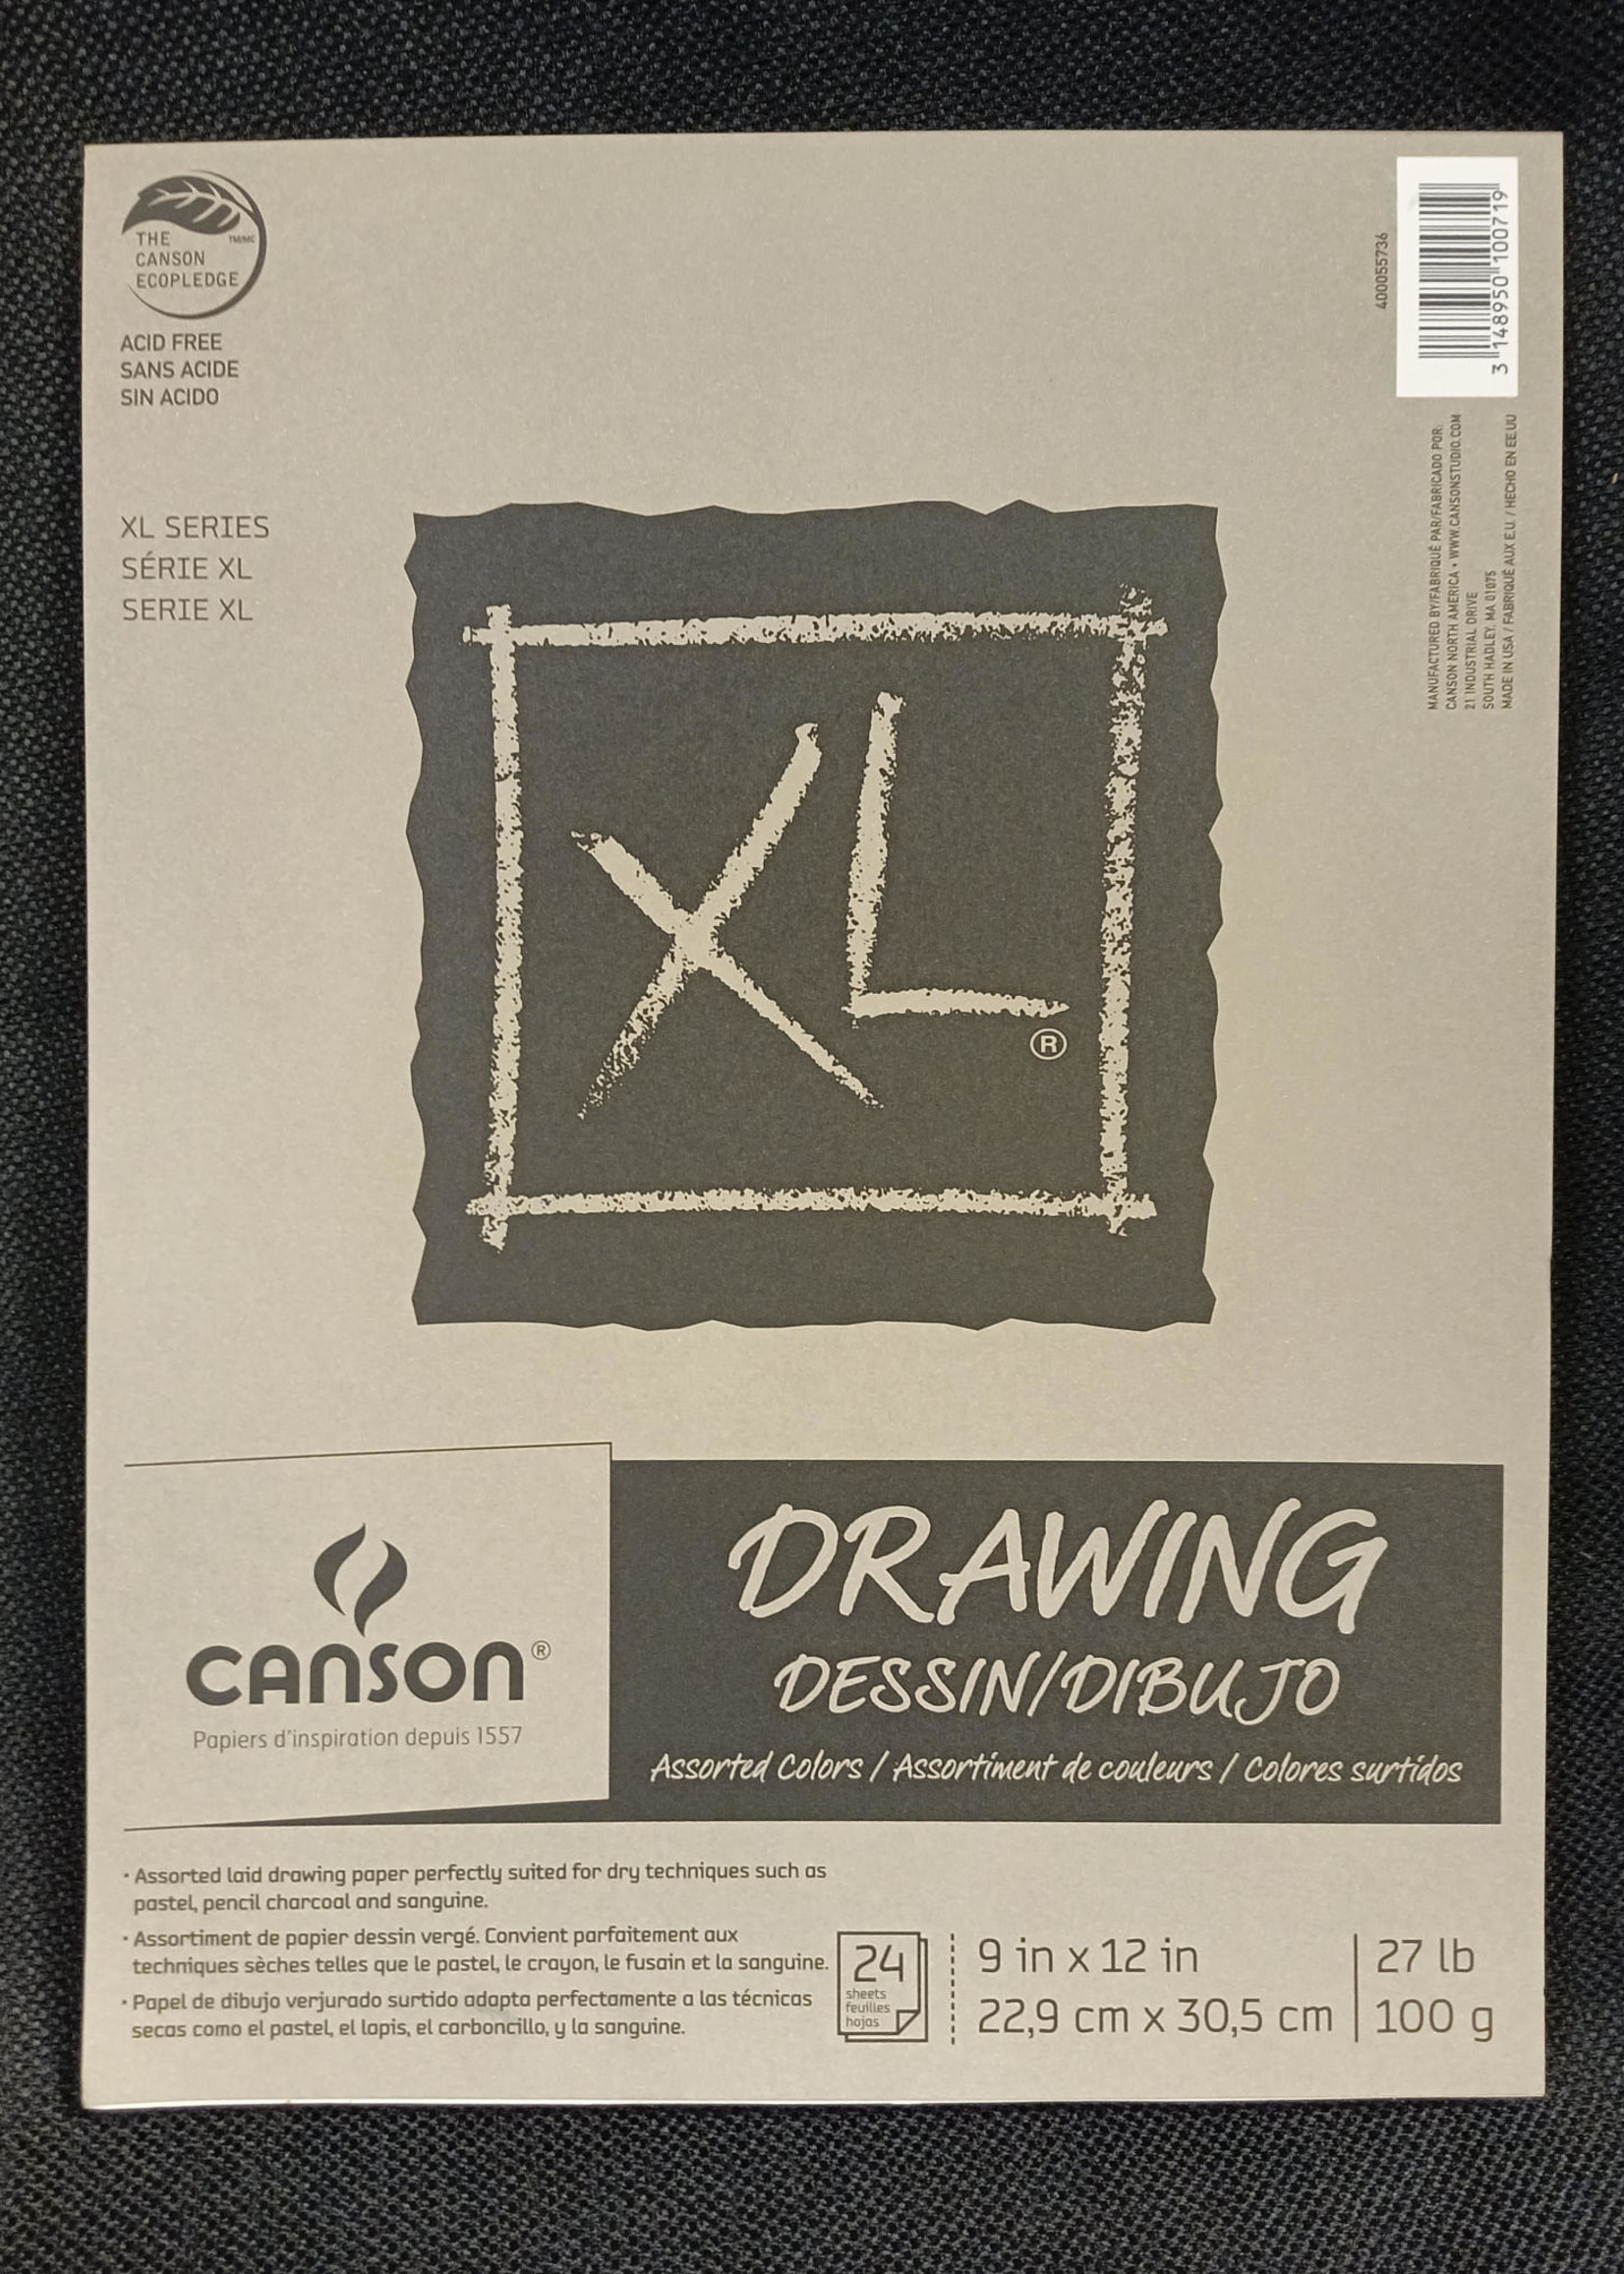 CANSON / PACON PAPERS CN - XL 9X12 DRAWING PAD